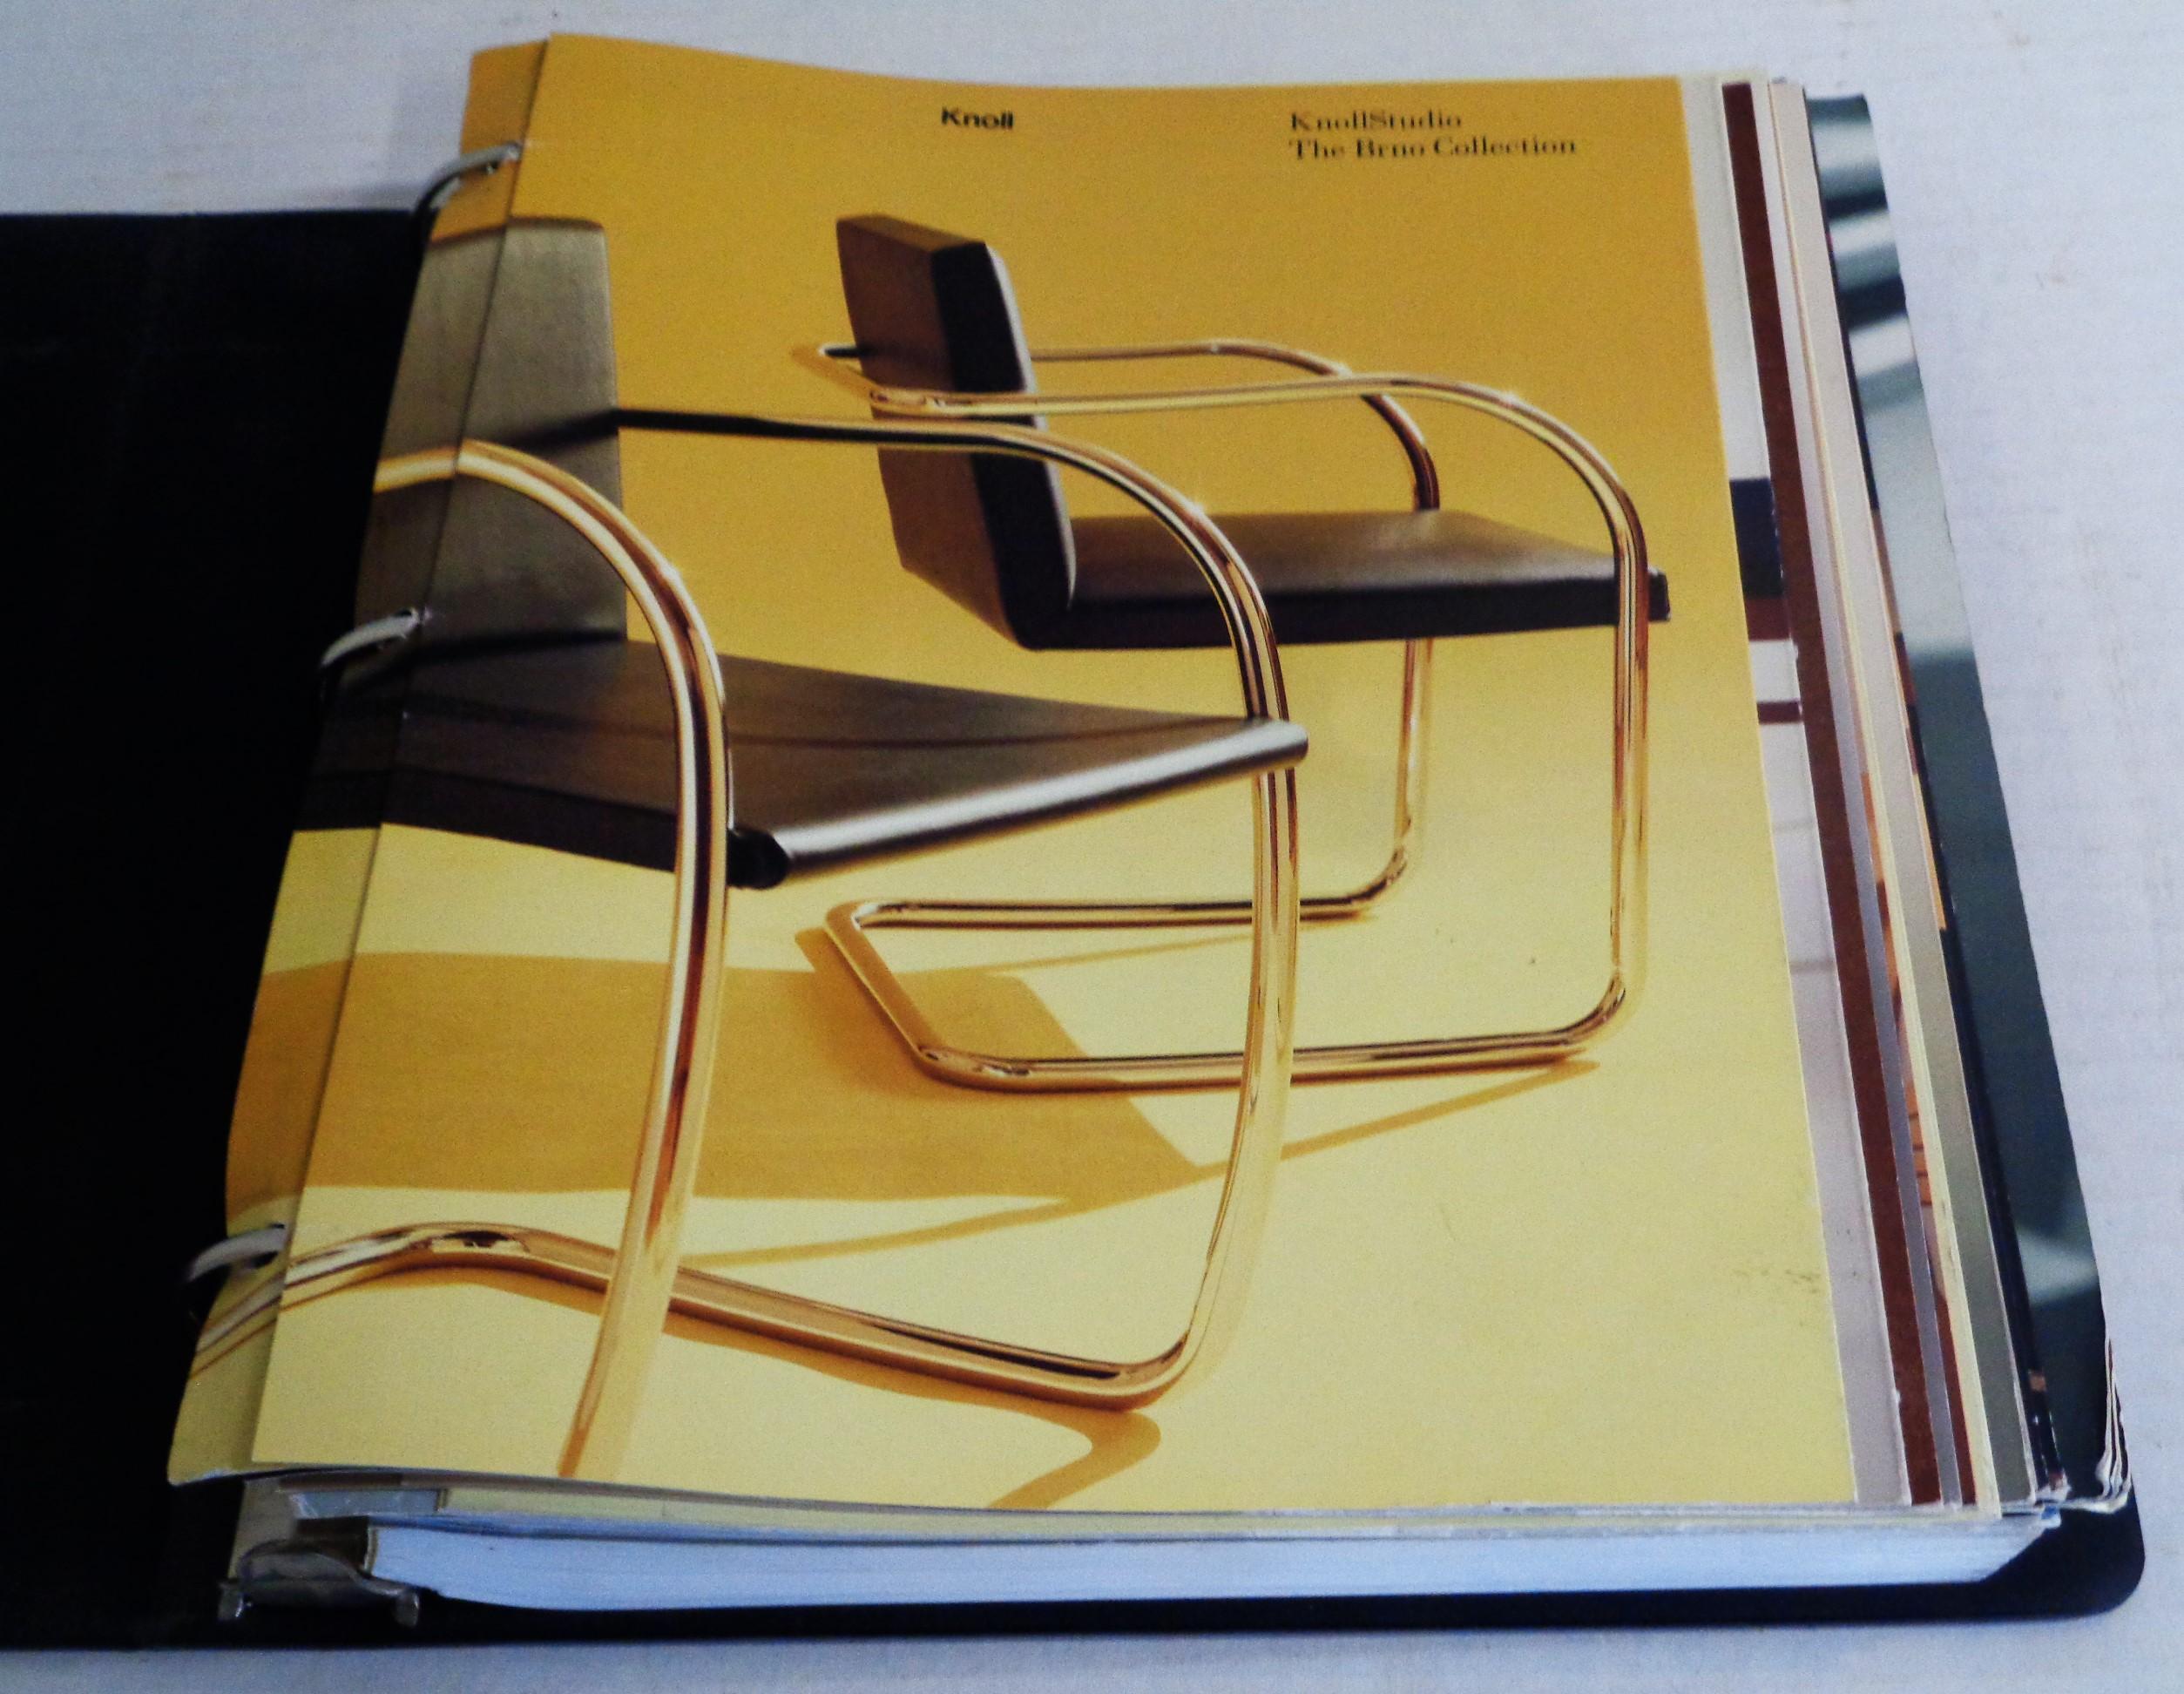 Knoll three ring binder w/ Knoll collection catalogues and the Knoll Studio price list - 306 pages showing images, diagrams, dimensions, finishes, fabrics - for the year 2000 collecton. Catalogues are colorfully illustrated in folding and accordion